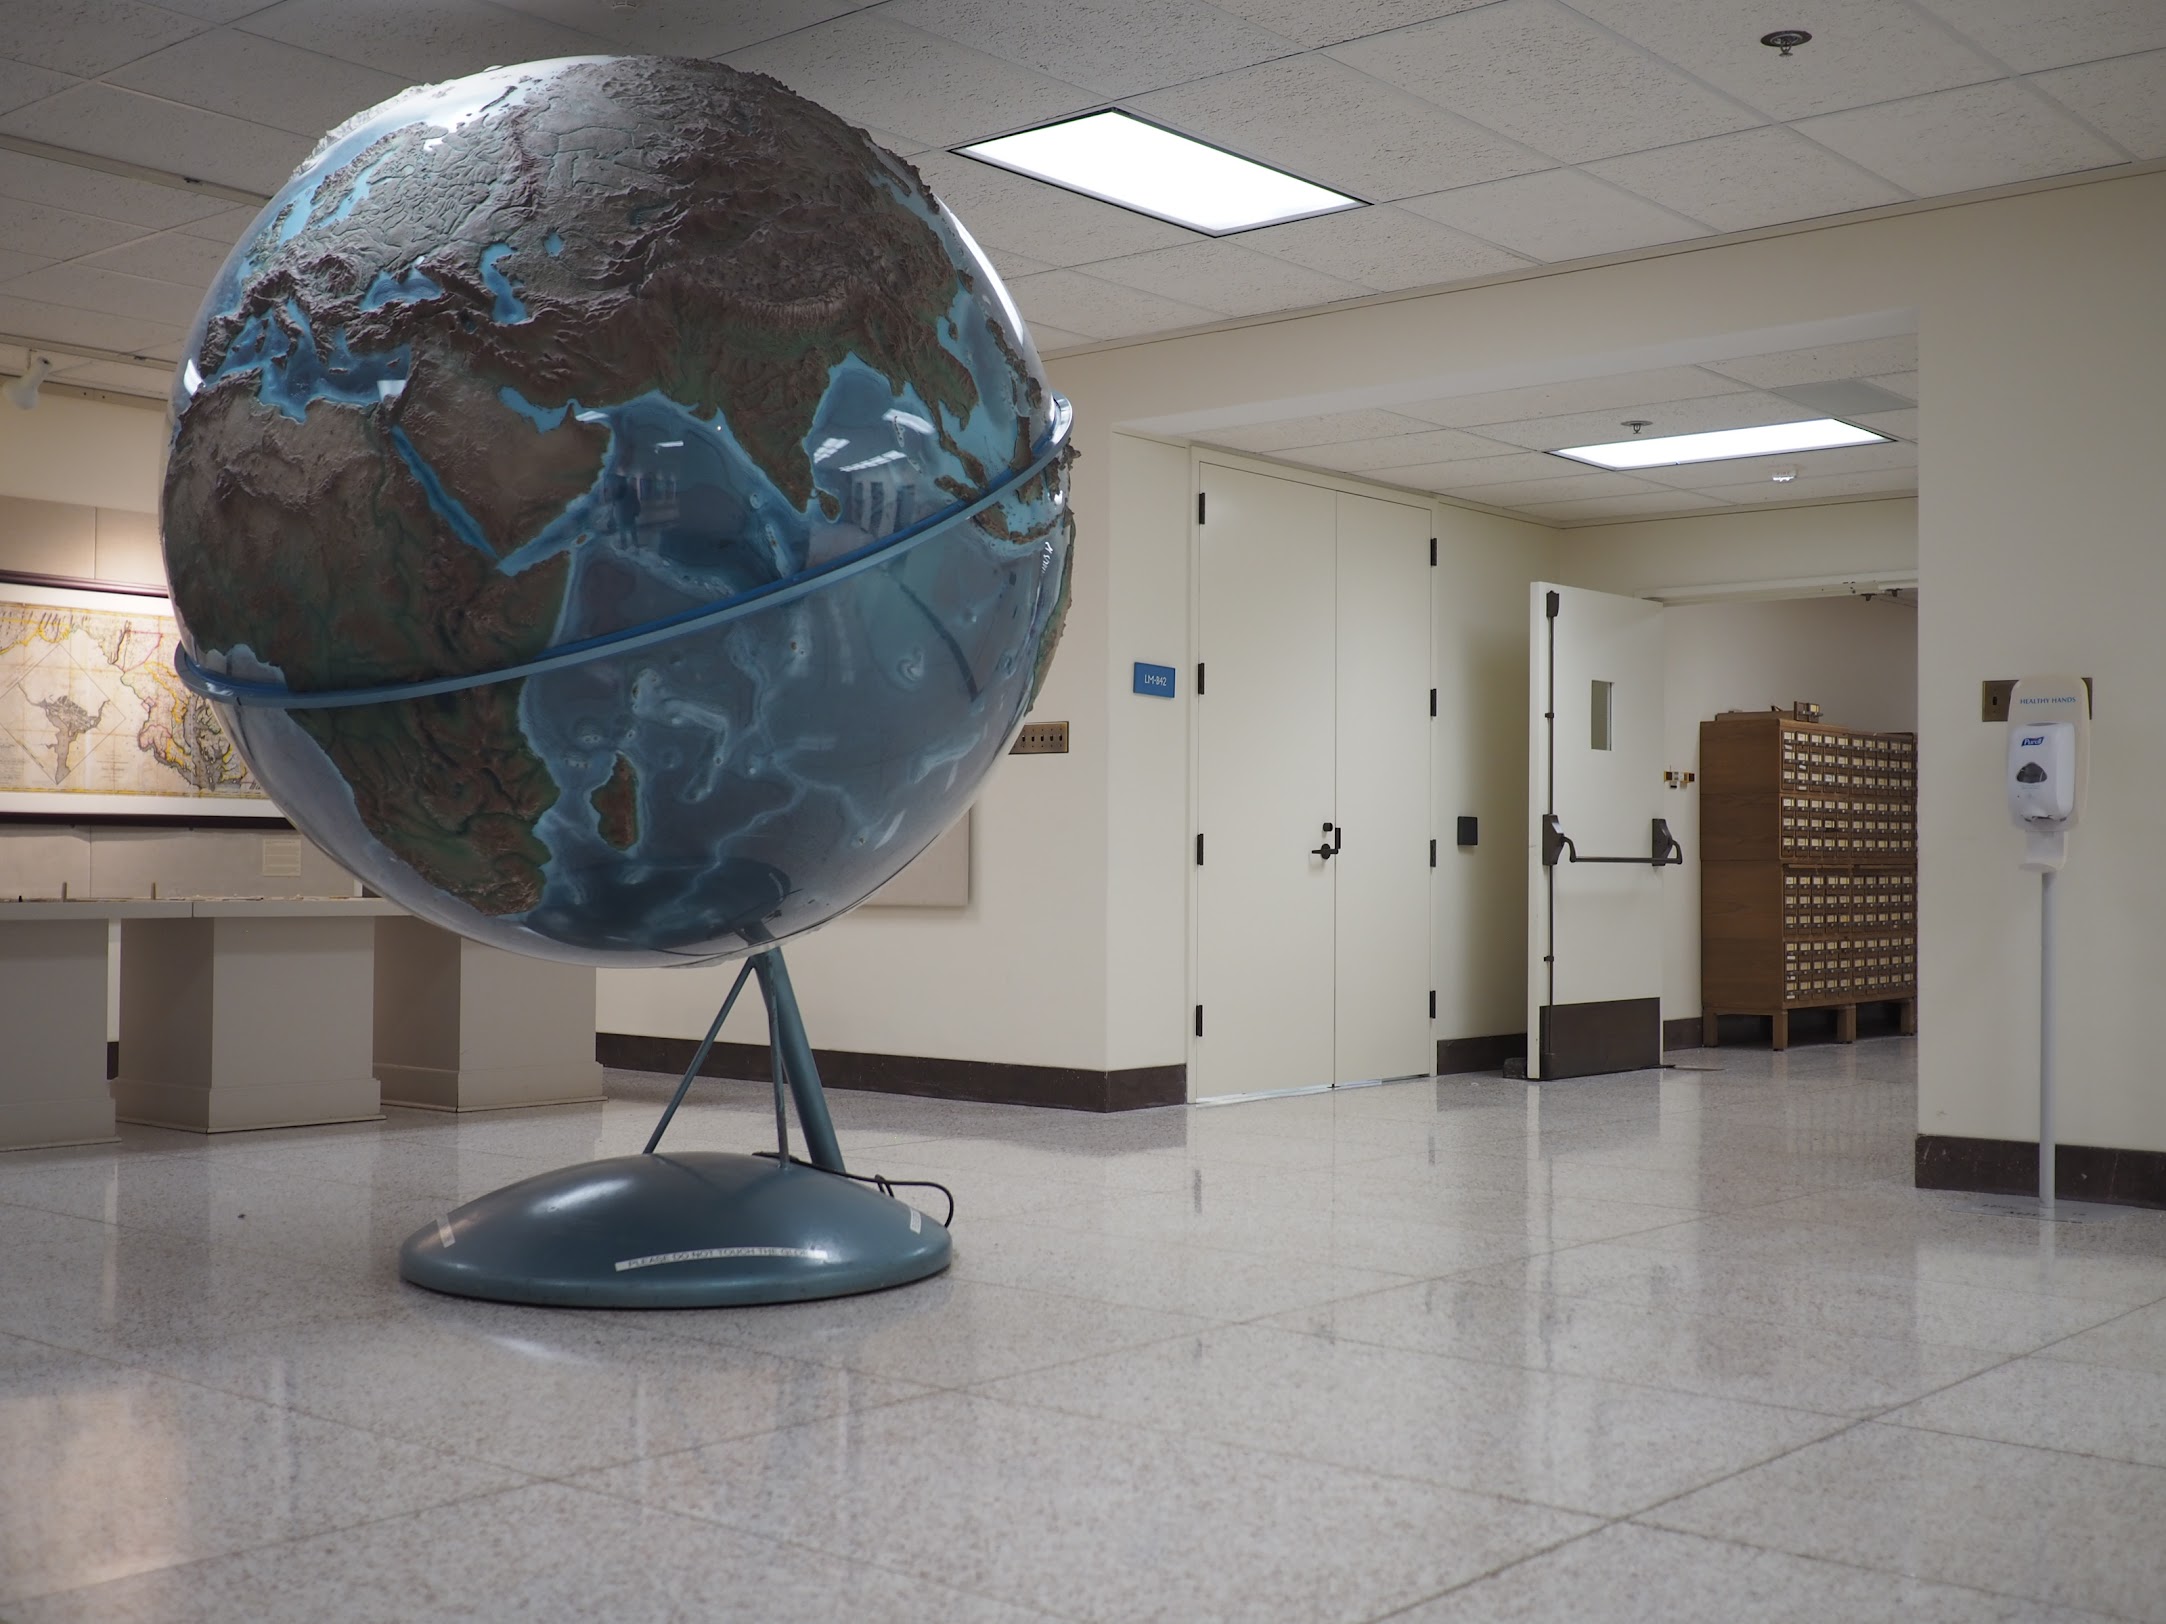 A photograph of a large scultural globe of the world inside of a building with no windows